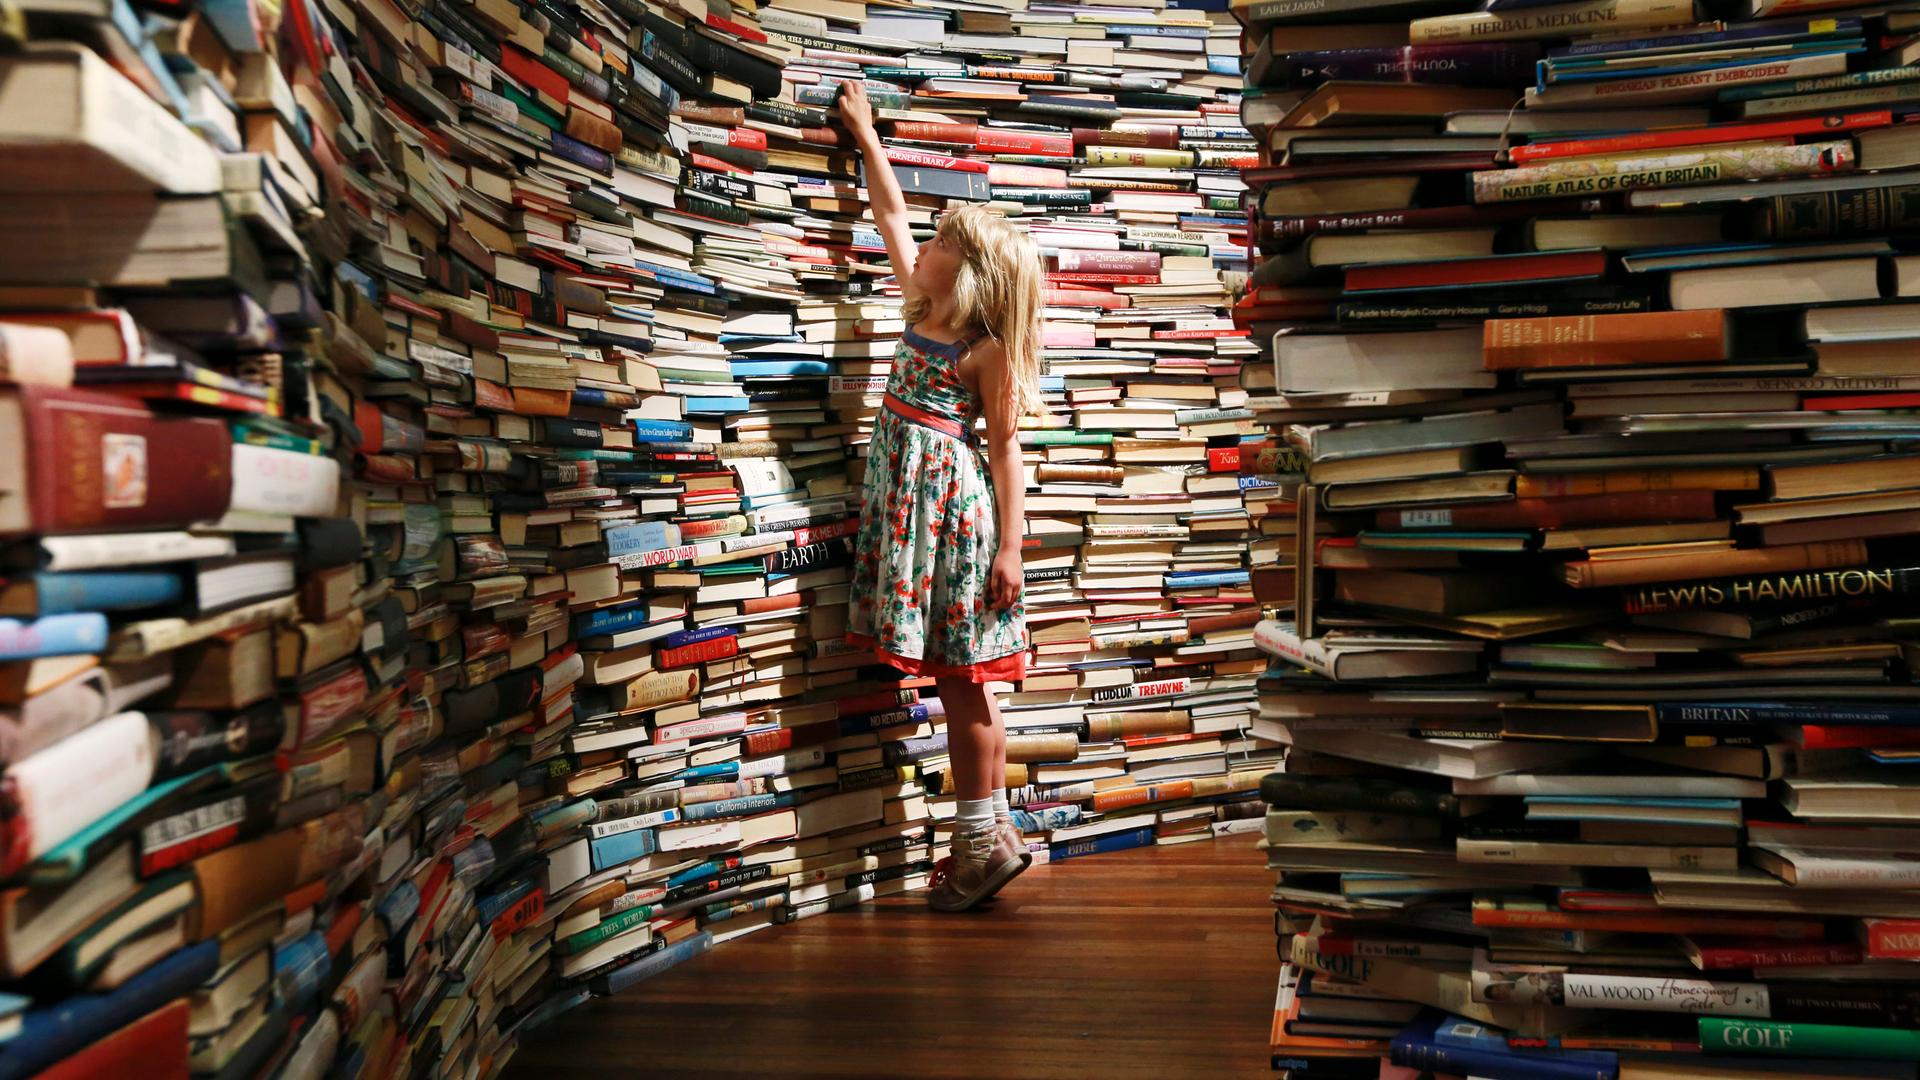 Leona, 7, poses inside a labyrinth installation made up of 250,000 books titled "aMAZEme" by Marcos Saboya and Gualter Pupo at the Royal Festival Hall in central London July 31, 2012.